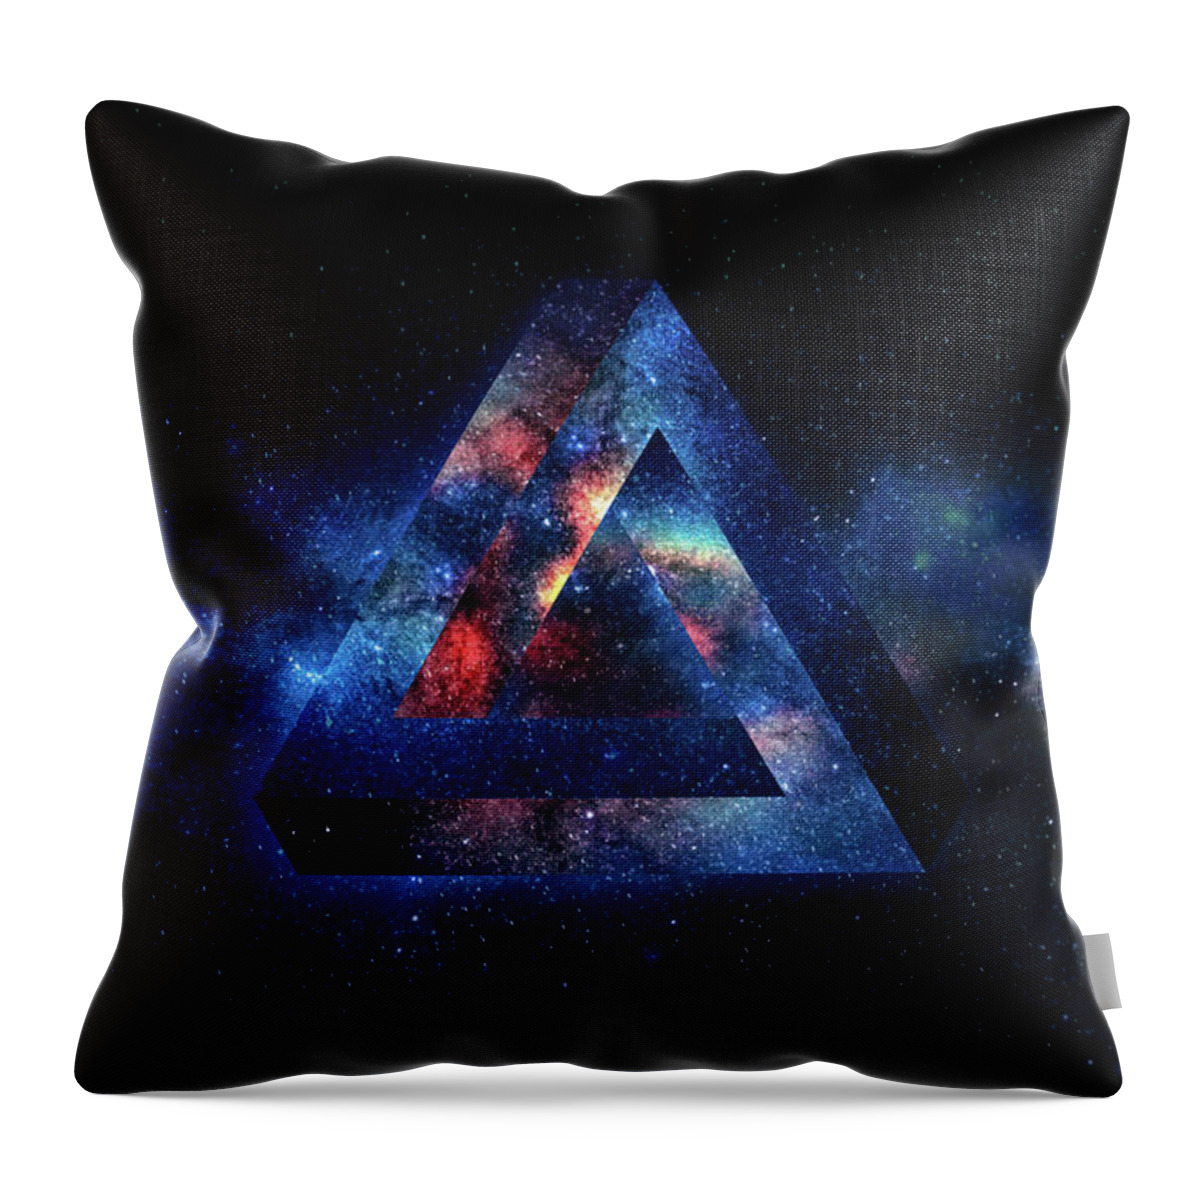 Stellar Throw Pillow featuring the photograph Penrose Triangle Outer Space by Pelo Blanco Photo